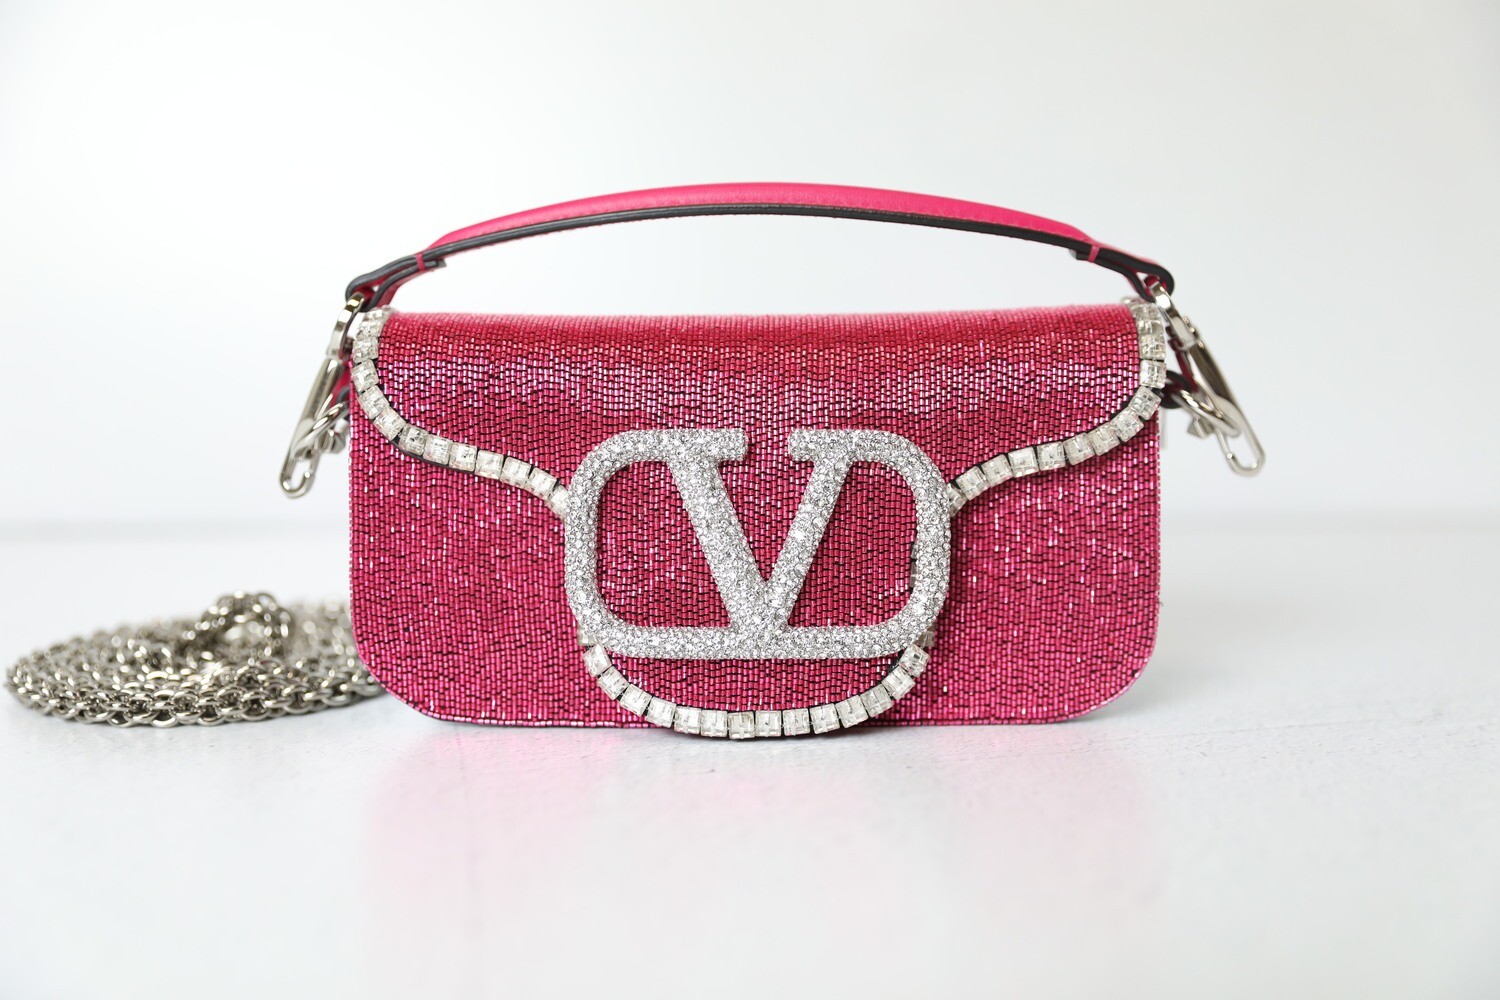 Valentino V Logo Crystal Beaded Bag, Magenta Pink with Silver Hardware, New  in Dustbag WA001